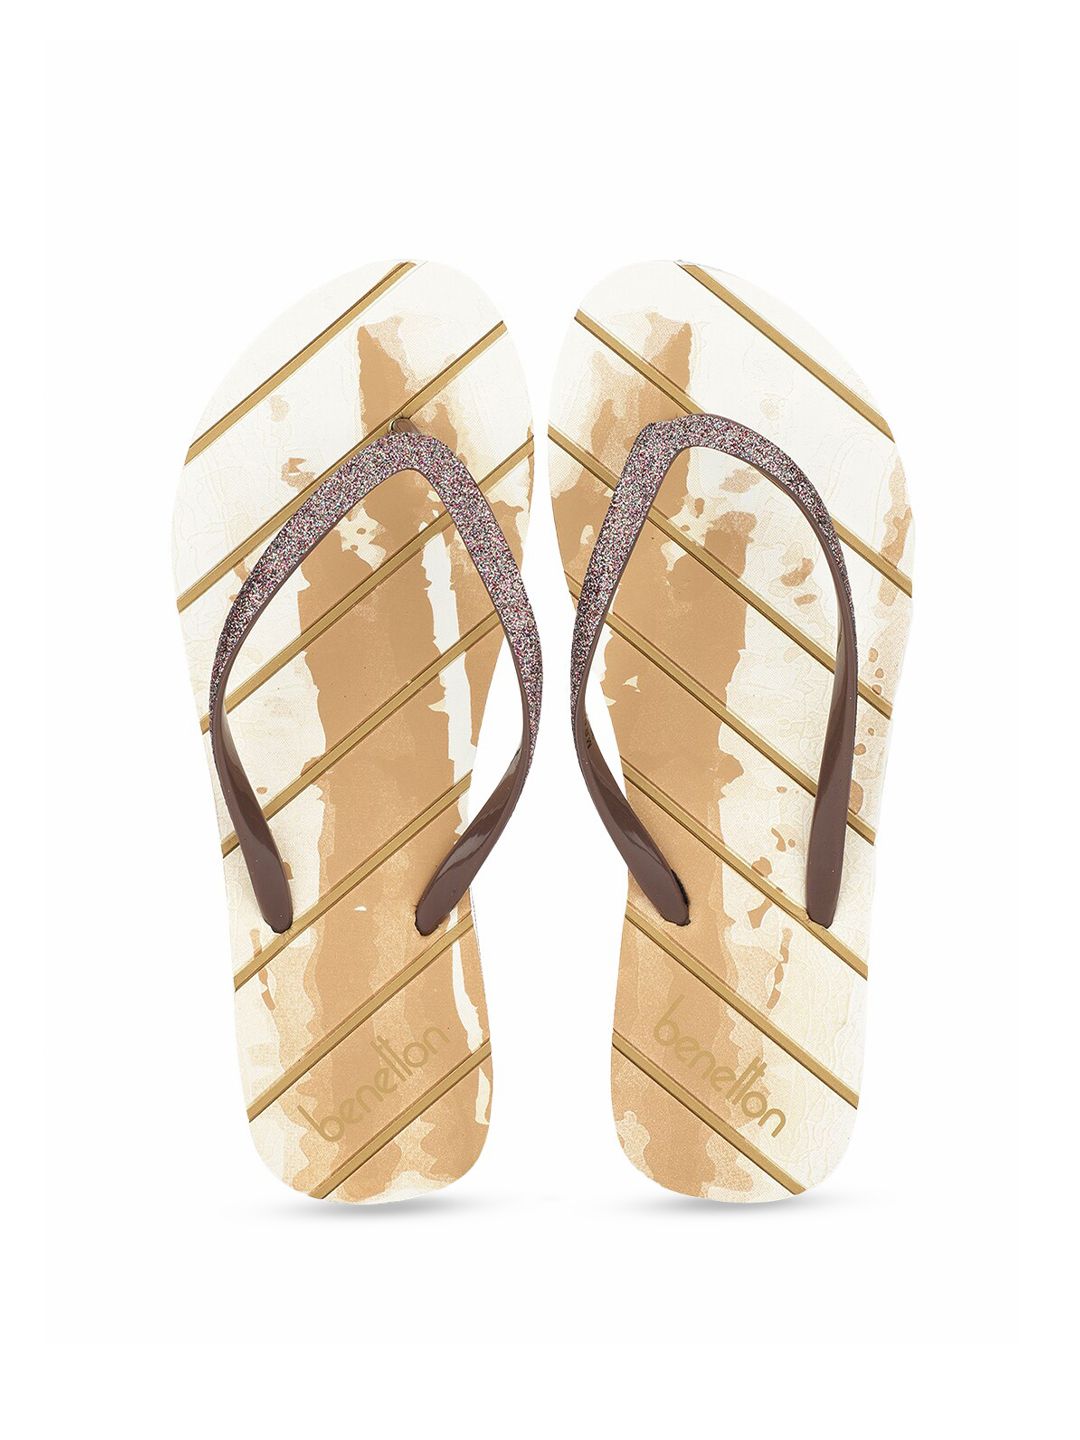 United Colors of Benetton Women Beige & Brown Striped Thong Flip-Flops Price in India